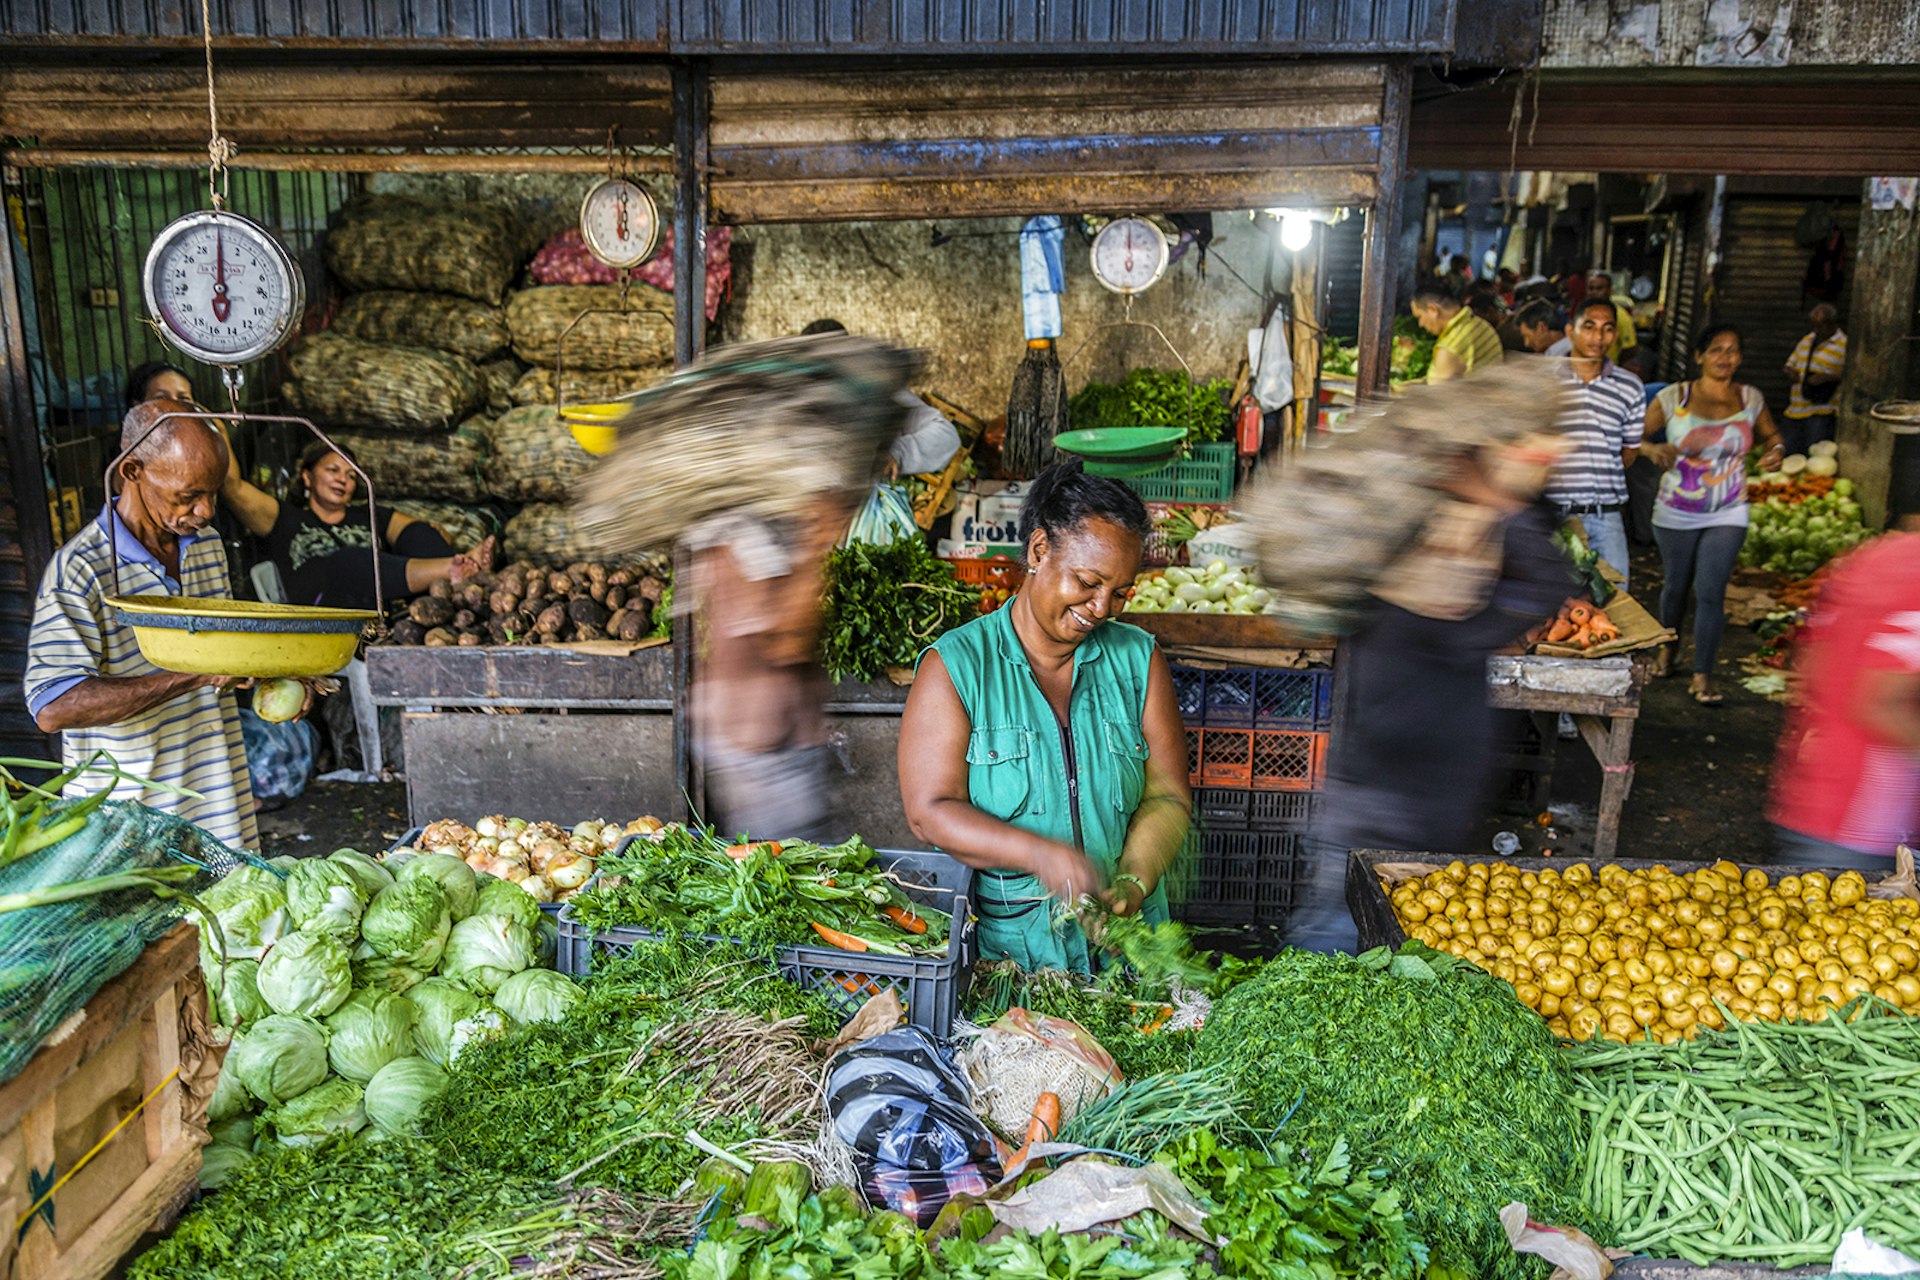 A smiling woman tends to green vegetables at a stand in a Colombian market. Men pass behind her carrying bags of produce on their shoulders.